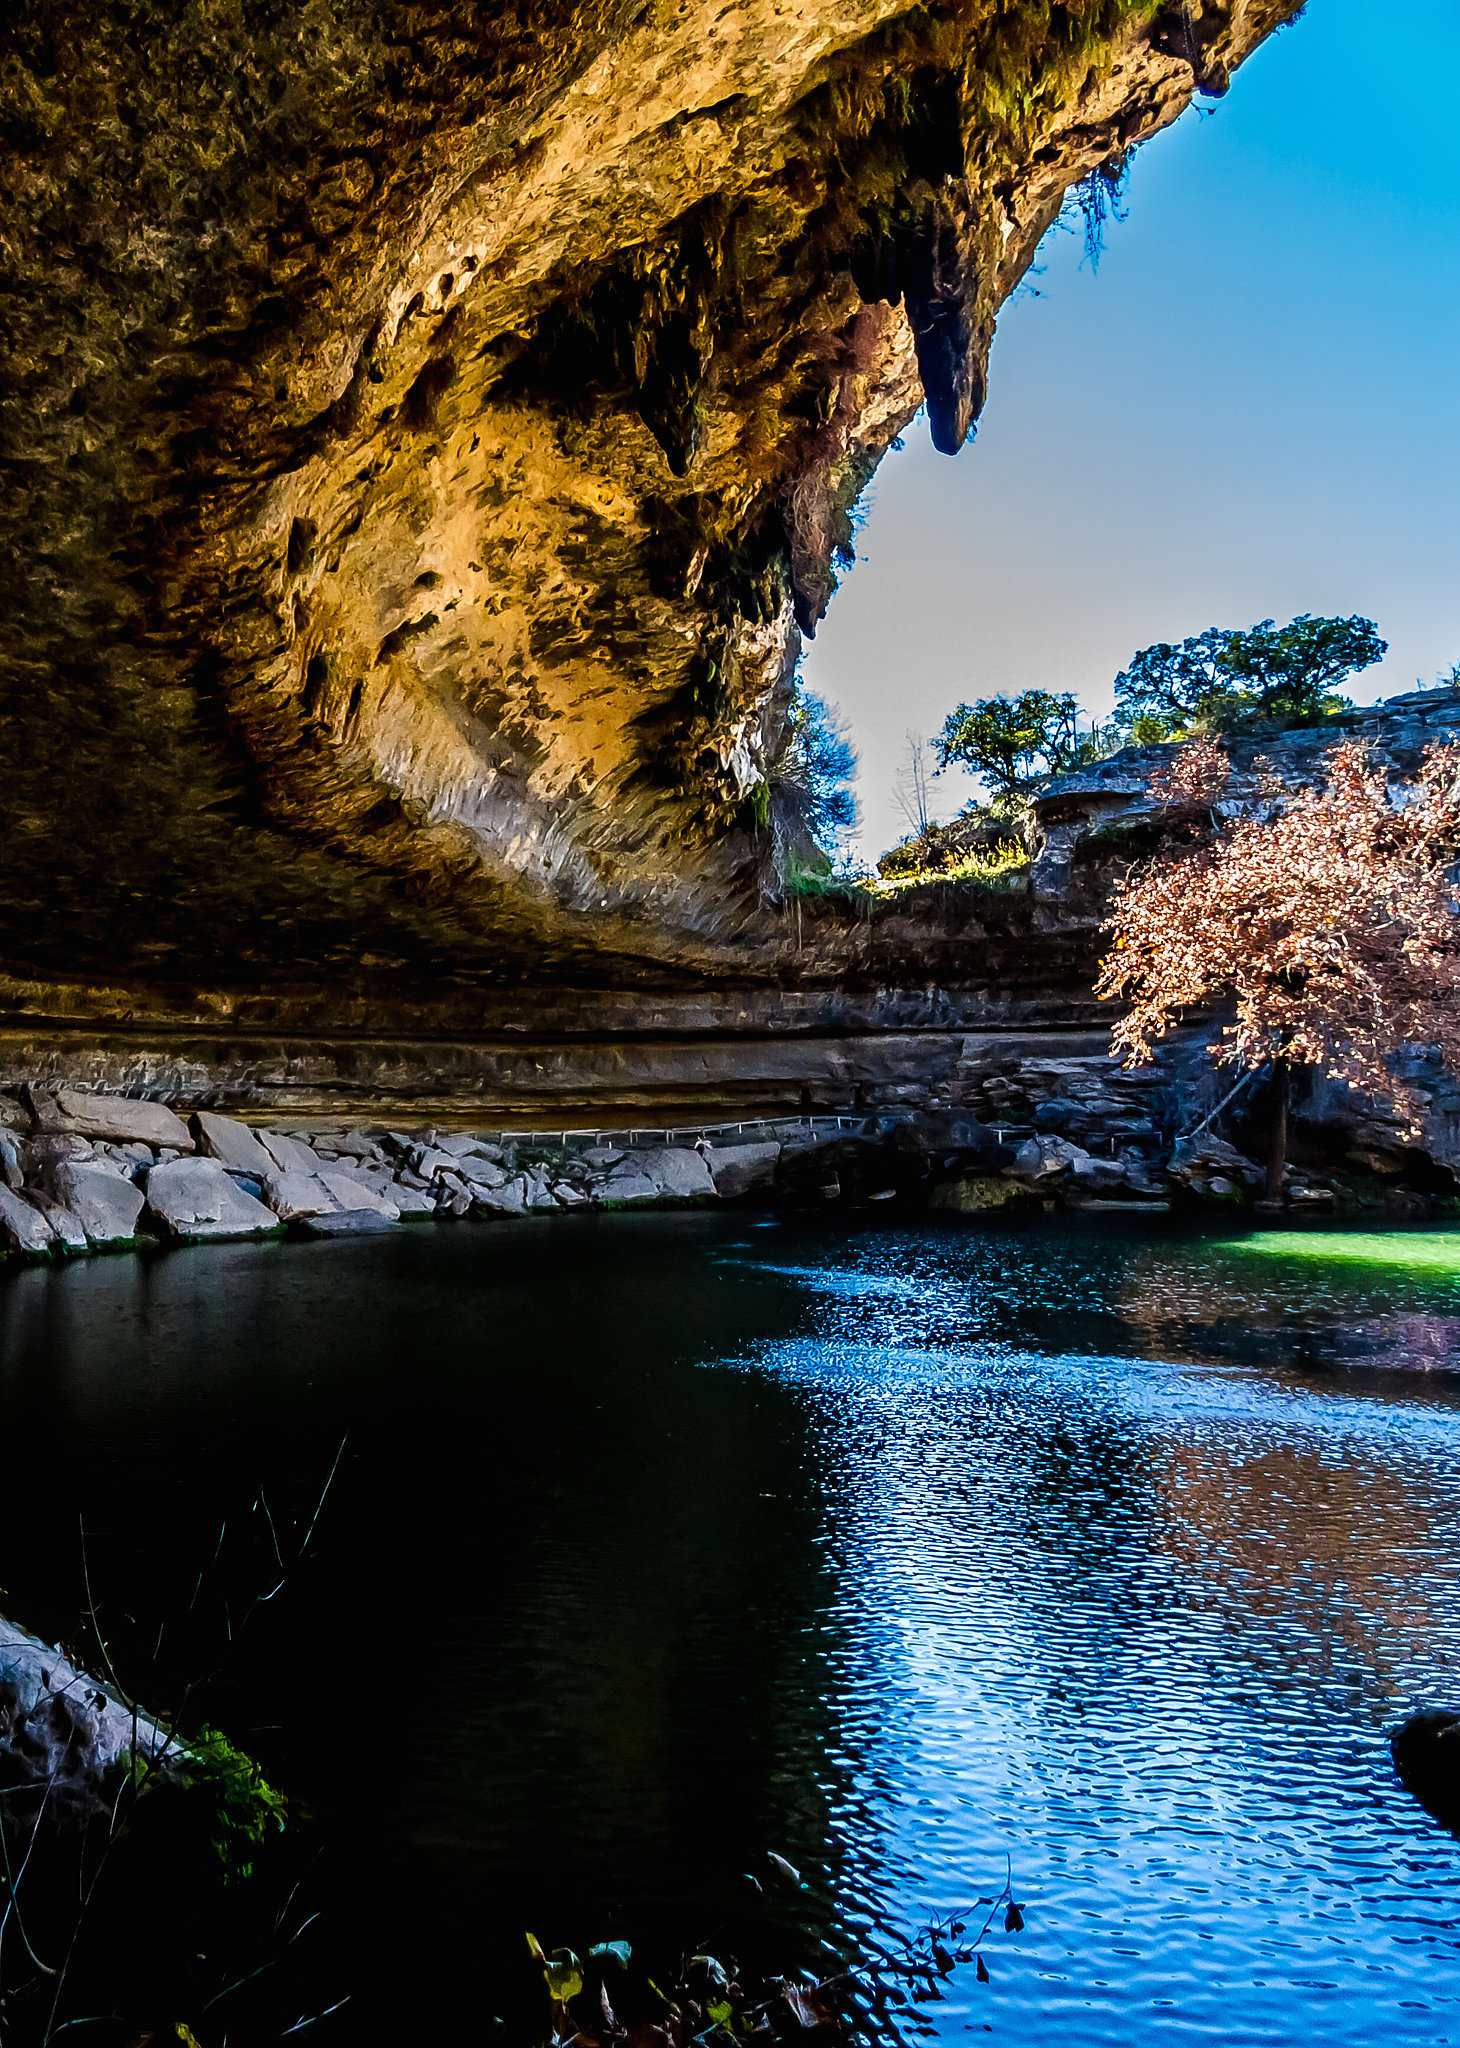 Hamilton Pool 32 Surreal Travel Spots You Won't Believe Exist in